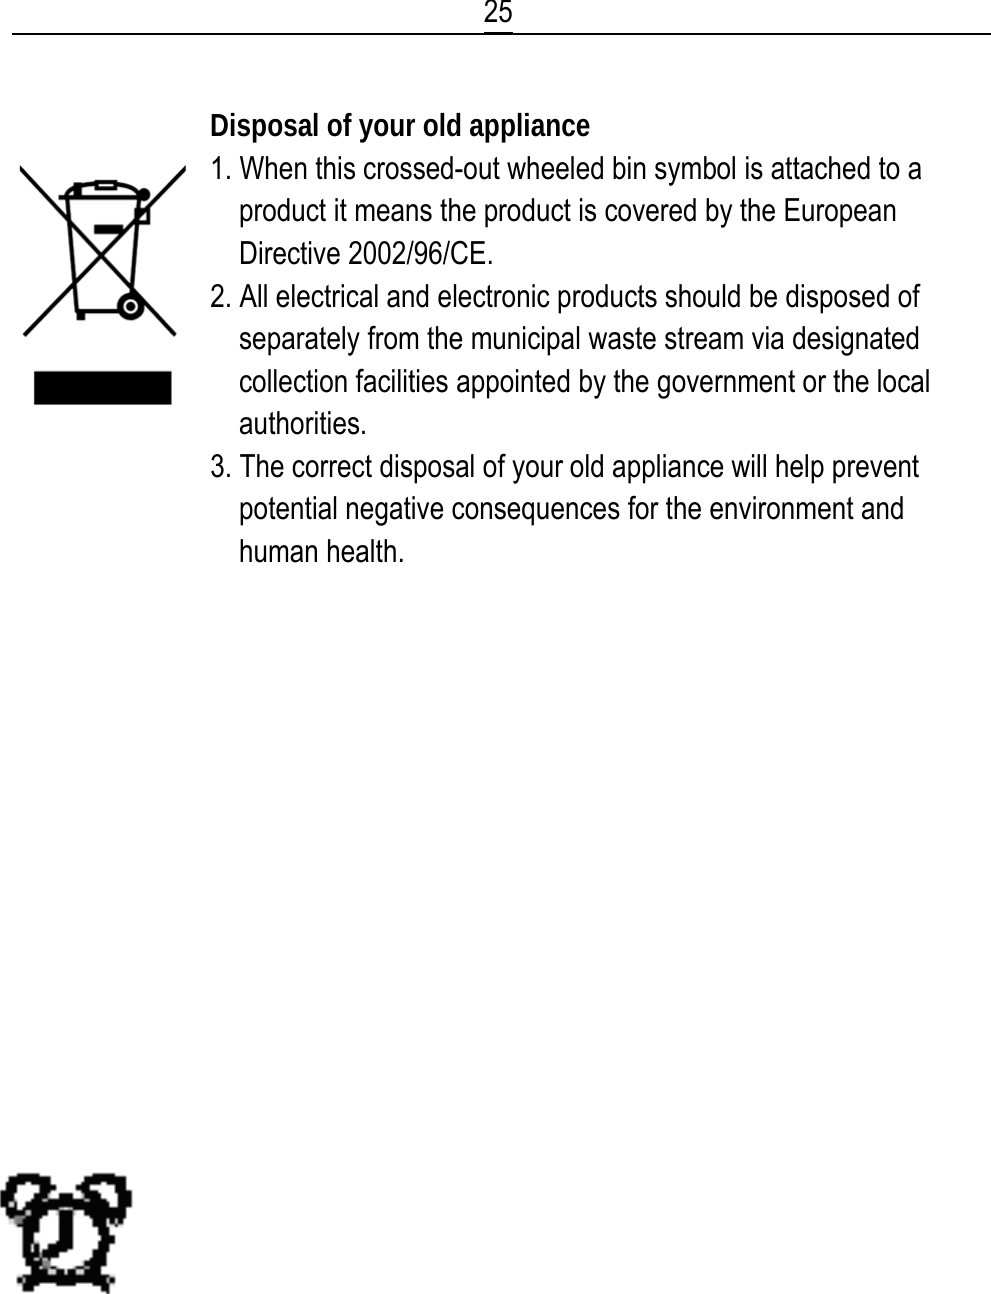  25  Disposal of your old appliance 1. When this crossed-out wheeled bin symbol is attached to a product it means the product is covered by the European Directive 2002/96/CE. 2. All electrical and electronic products should be disposed of separately from the municipal waste stream via designated collection facilities appointed by the government or the local authorities. 3. The correct disposal of your old appliance will help prevent potential negative consequences for the environment and human health.                  